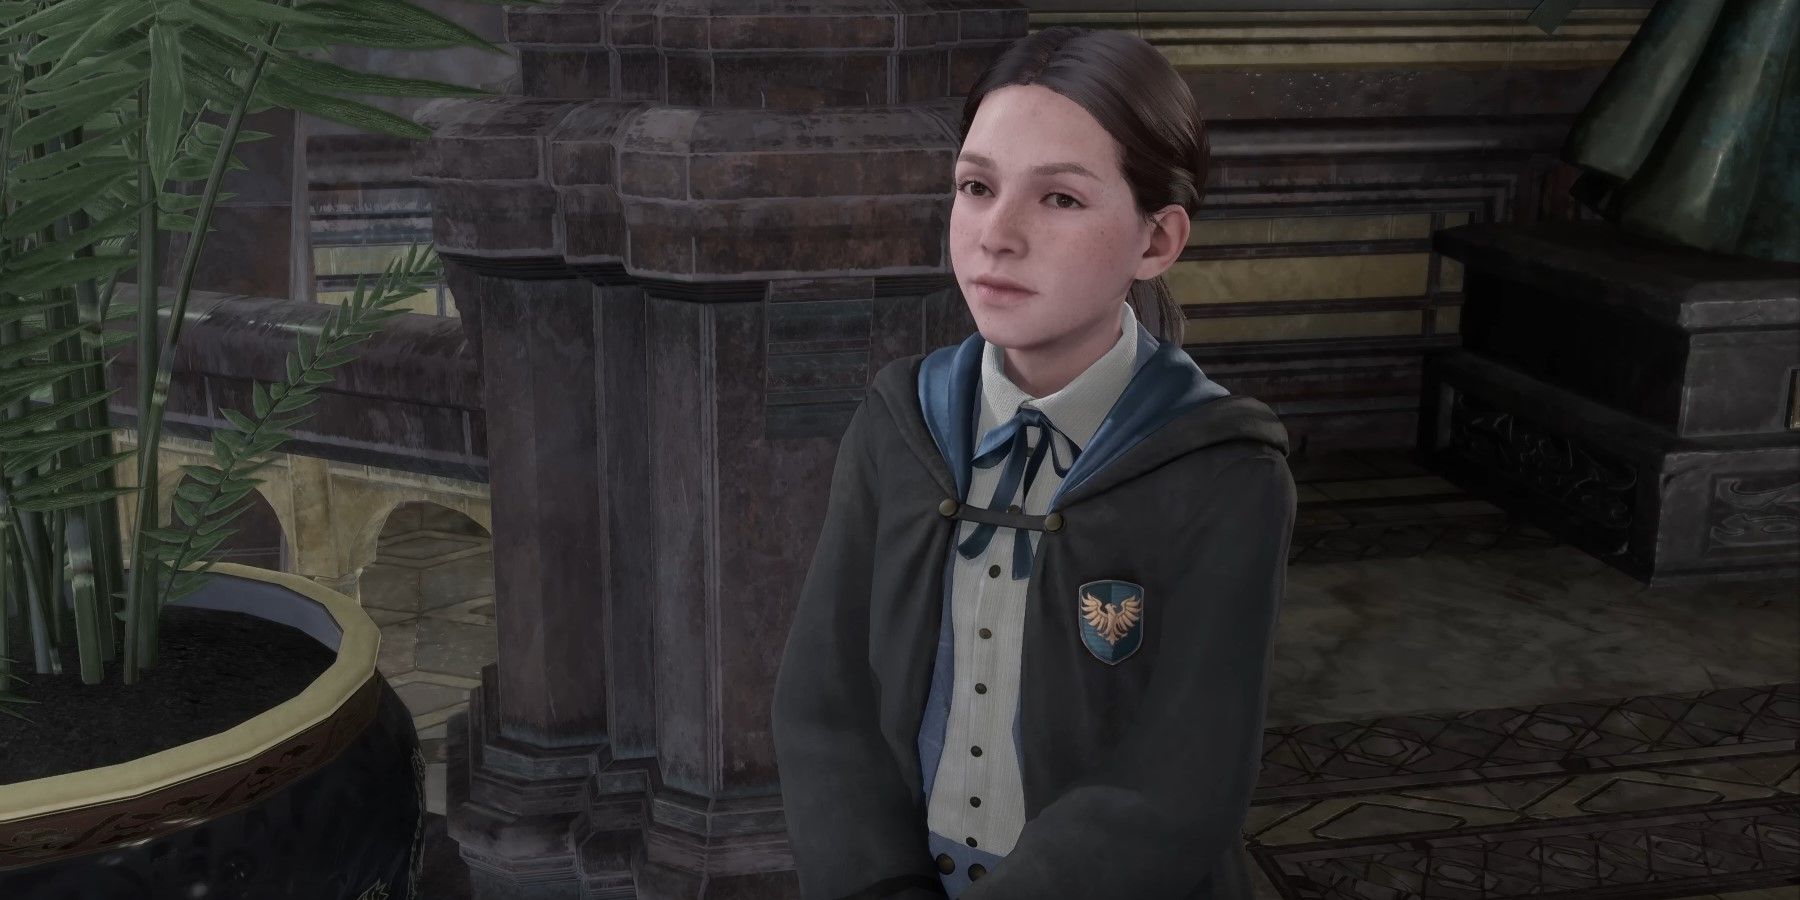 Game Rant - Hogwarts Legacy has been delayed on PS4 and